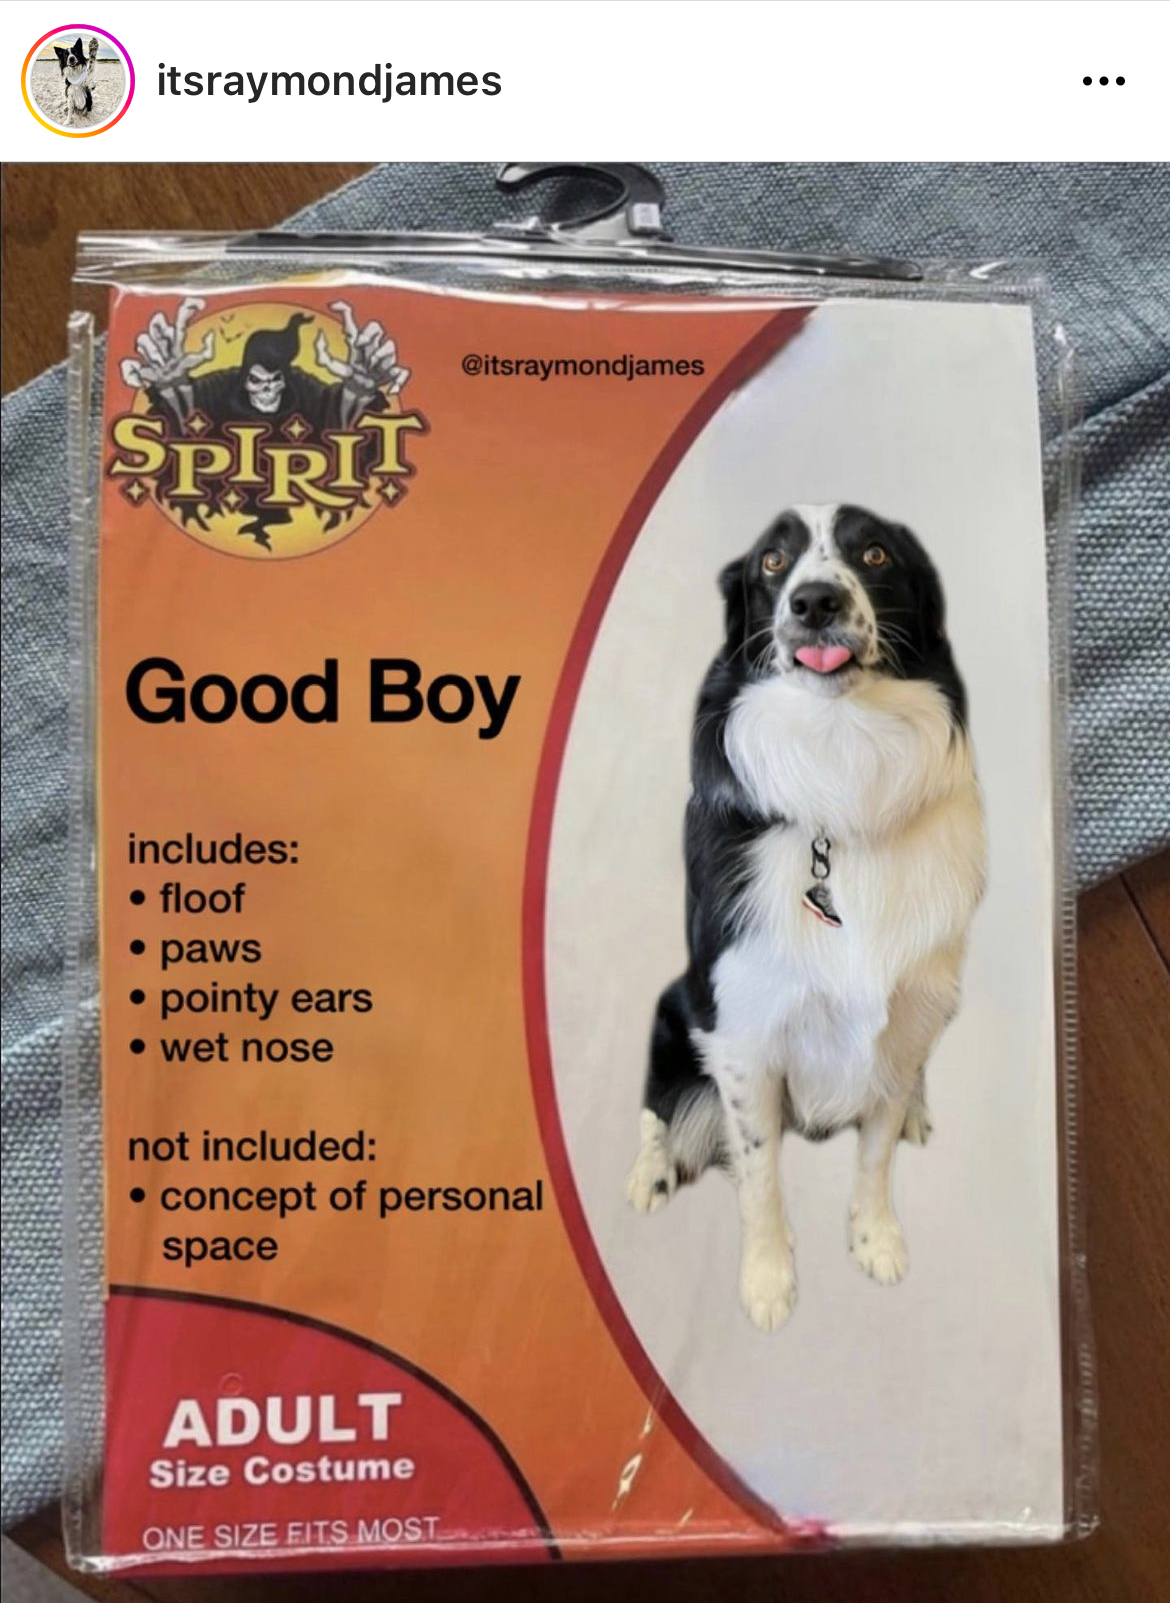 Costume Memes - spirit halloween - itsraymondjames Spirit Good Boy includes floof paws pointy ears wet nose not included concept of personal space Adult Size Costume One Size Fits Most